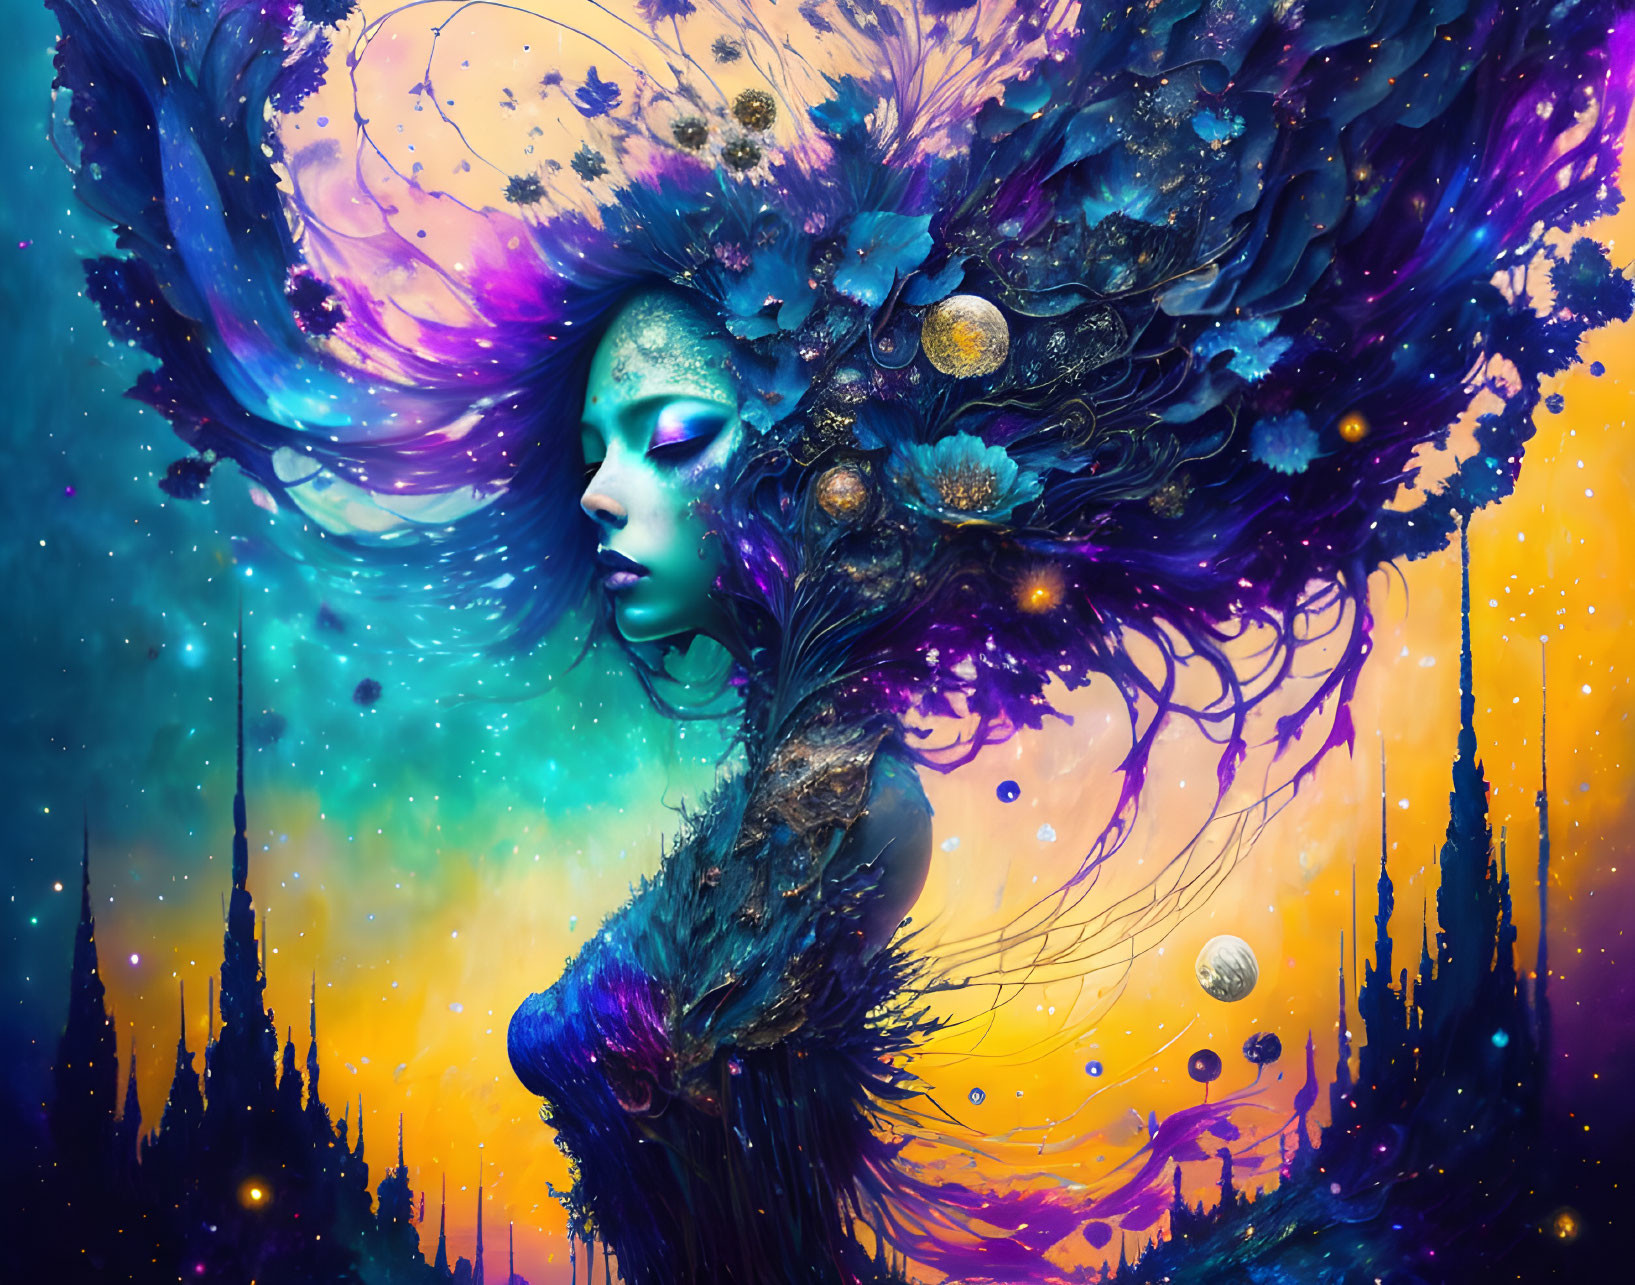 Cosmic-themed digital artwork of woman with starry hair on colorful backdrop